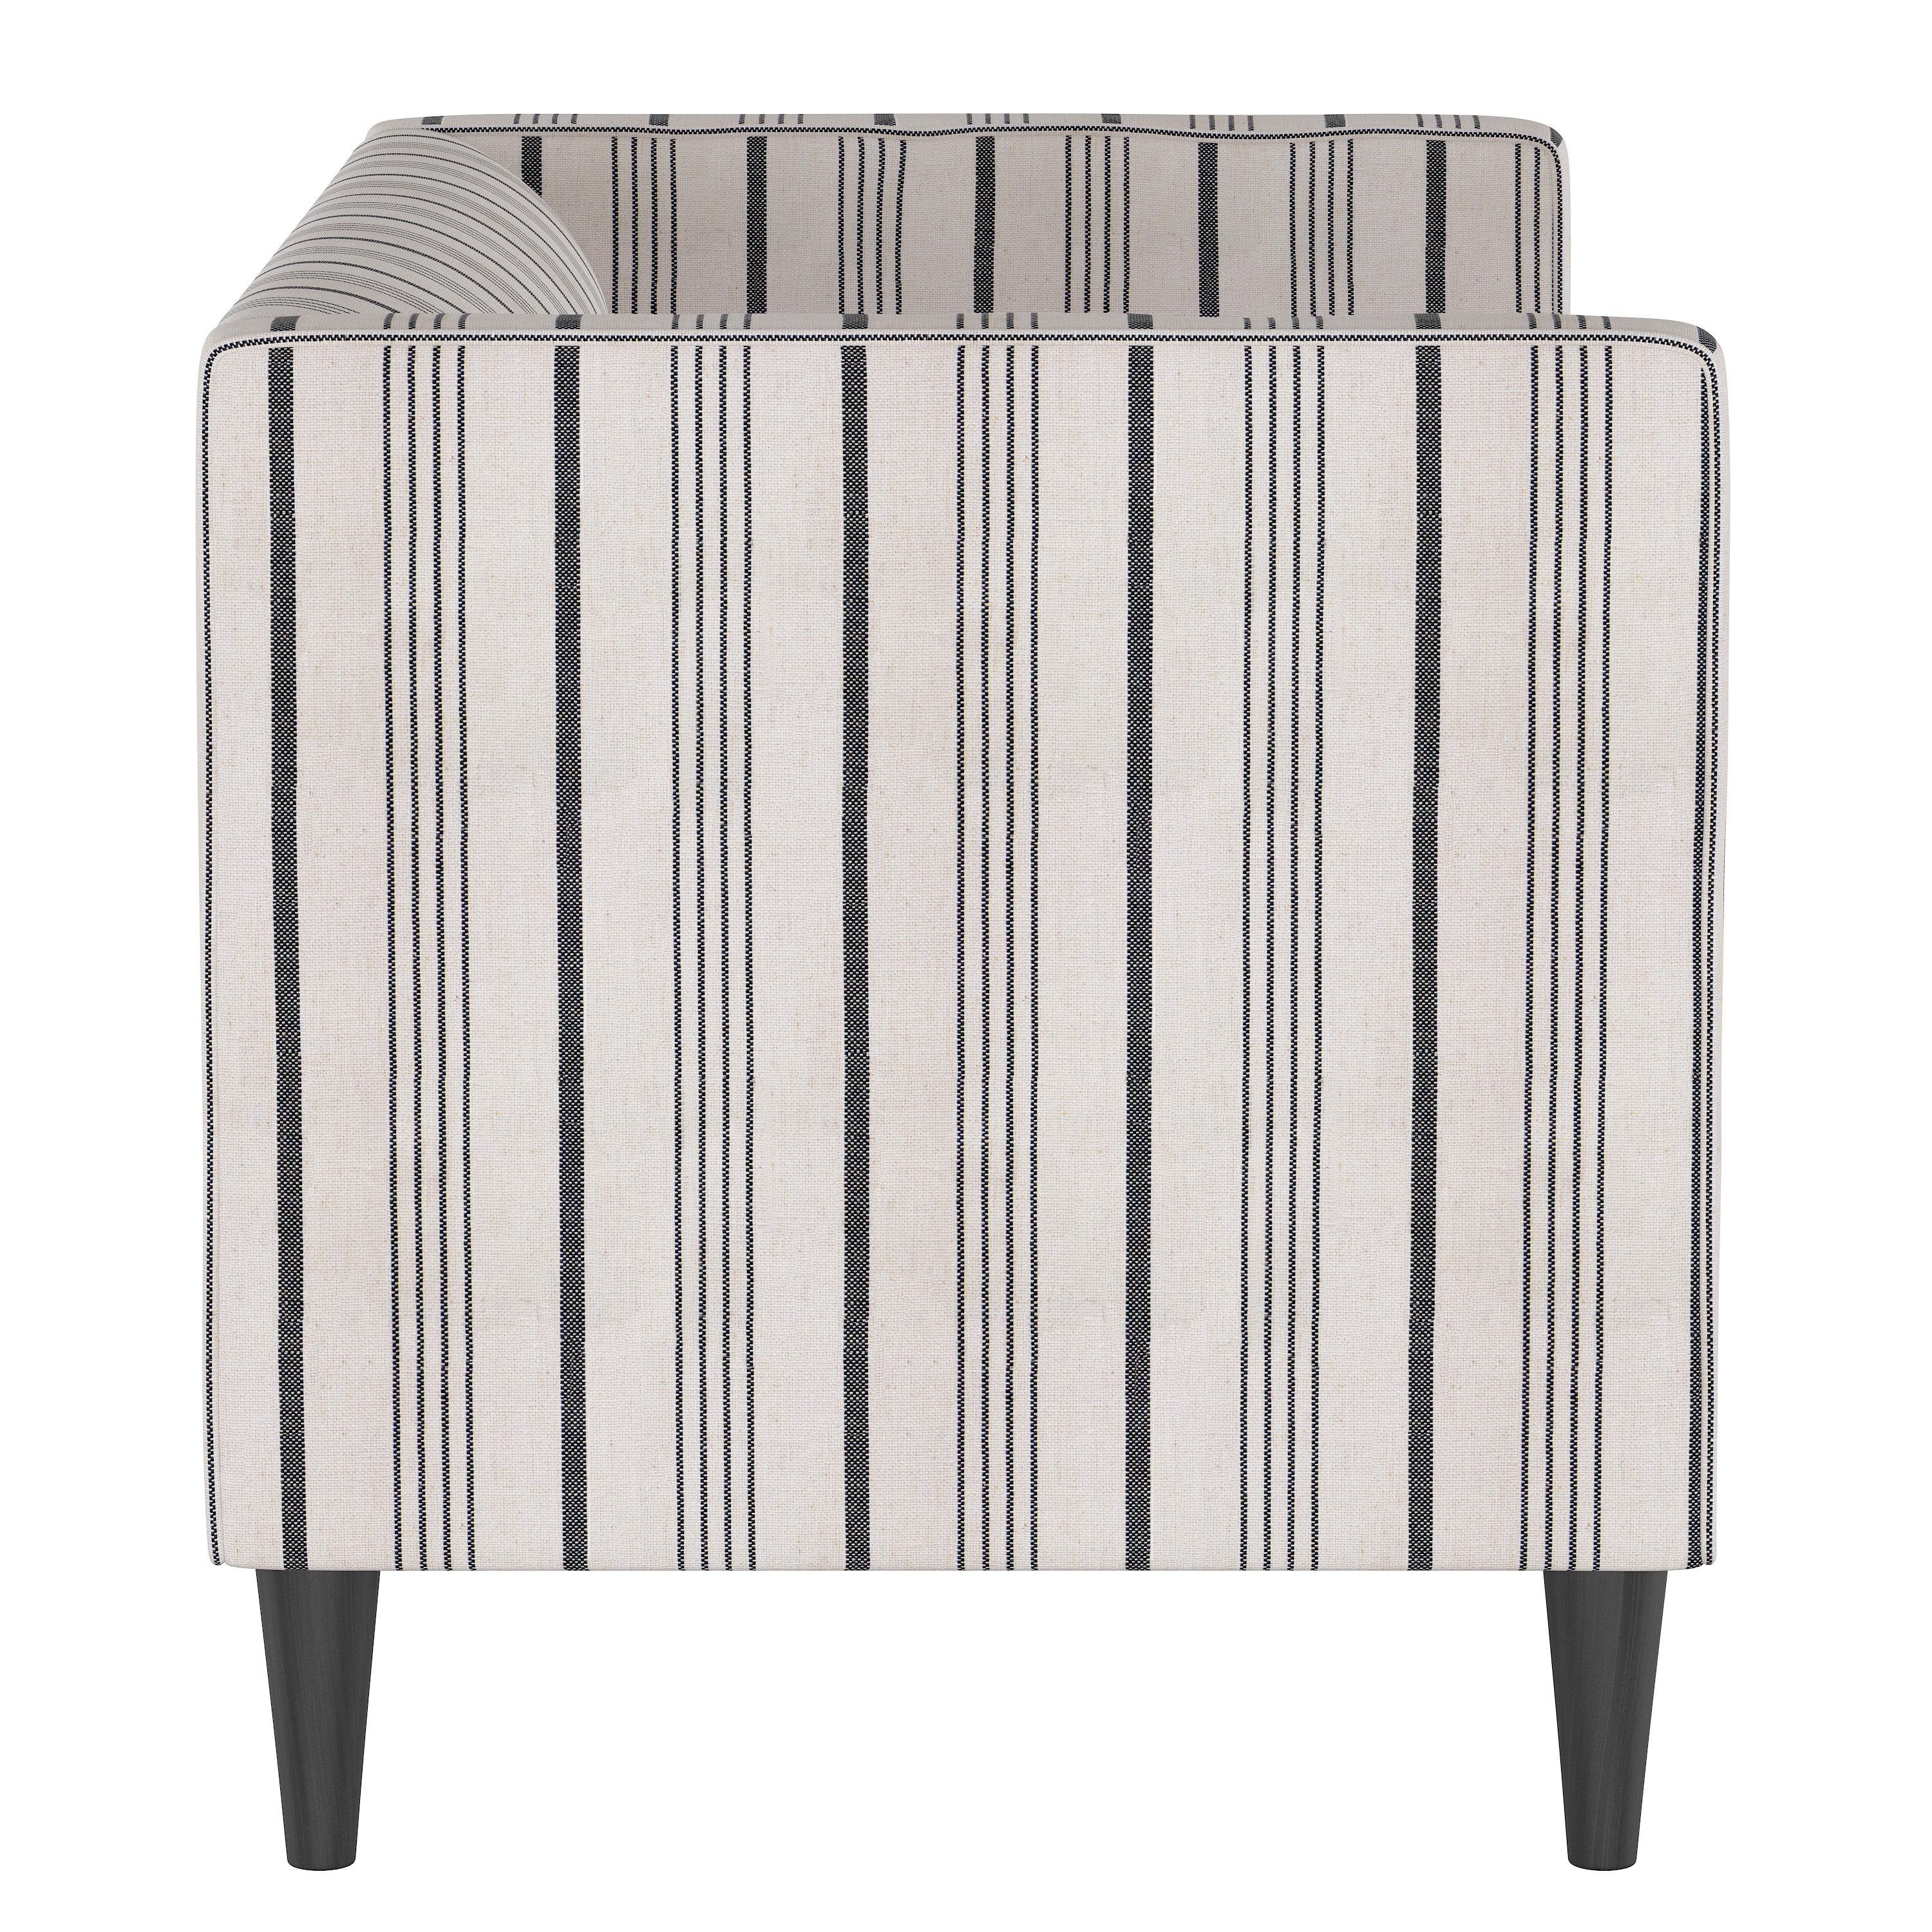 Downing Settee, Albion Stripe - DNU - Image 2